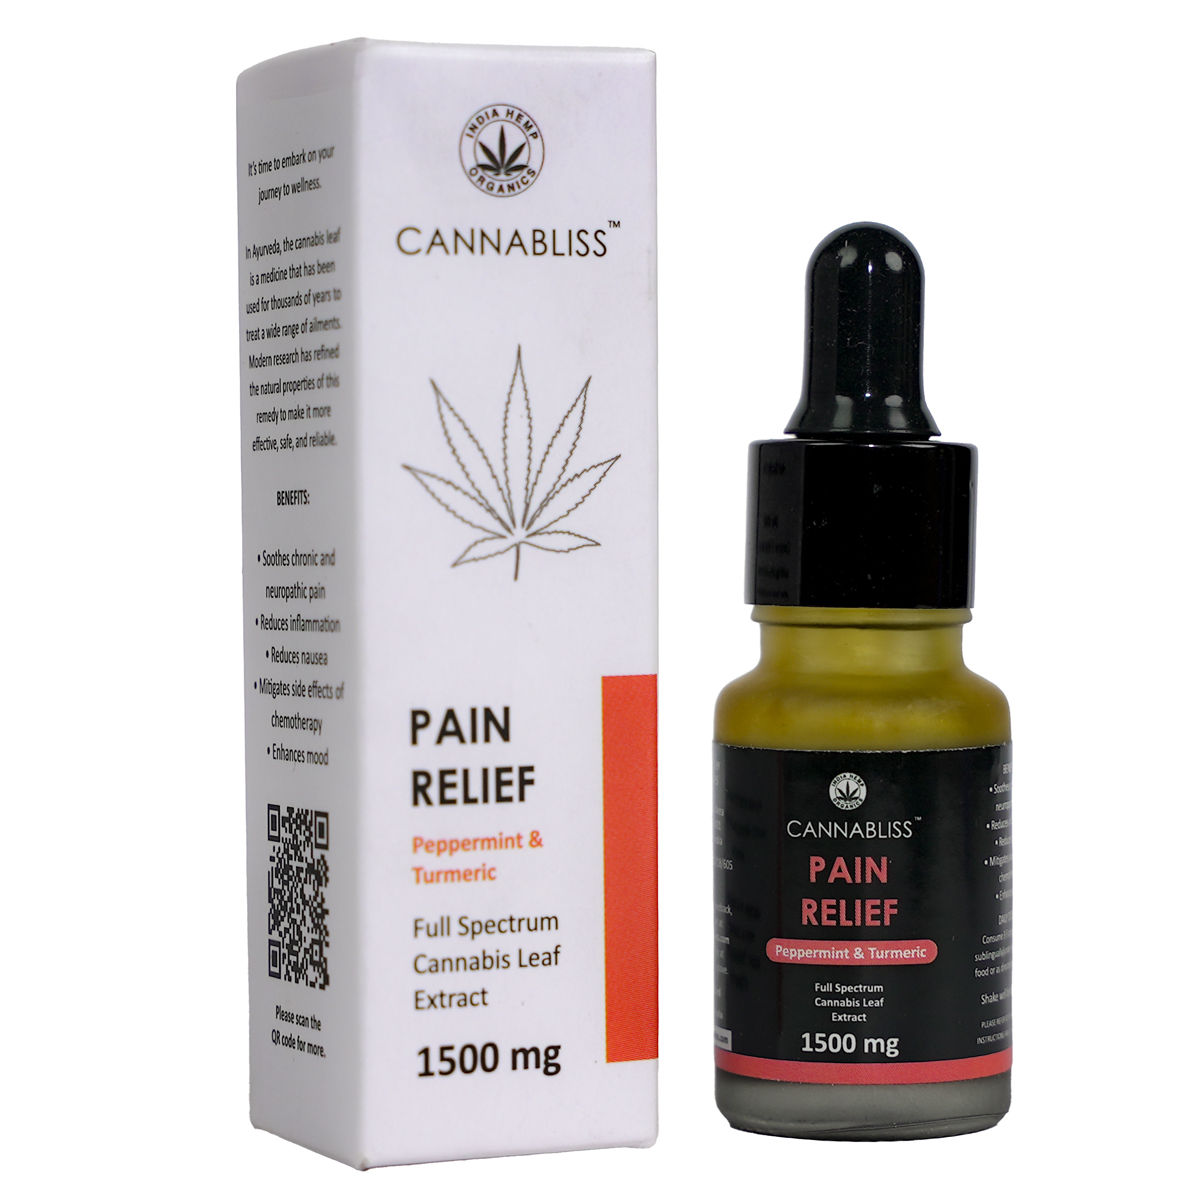 Buy Cannabliss Pain Relief 1500 mg Oil, 10 ml Online